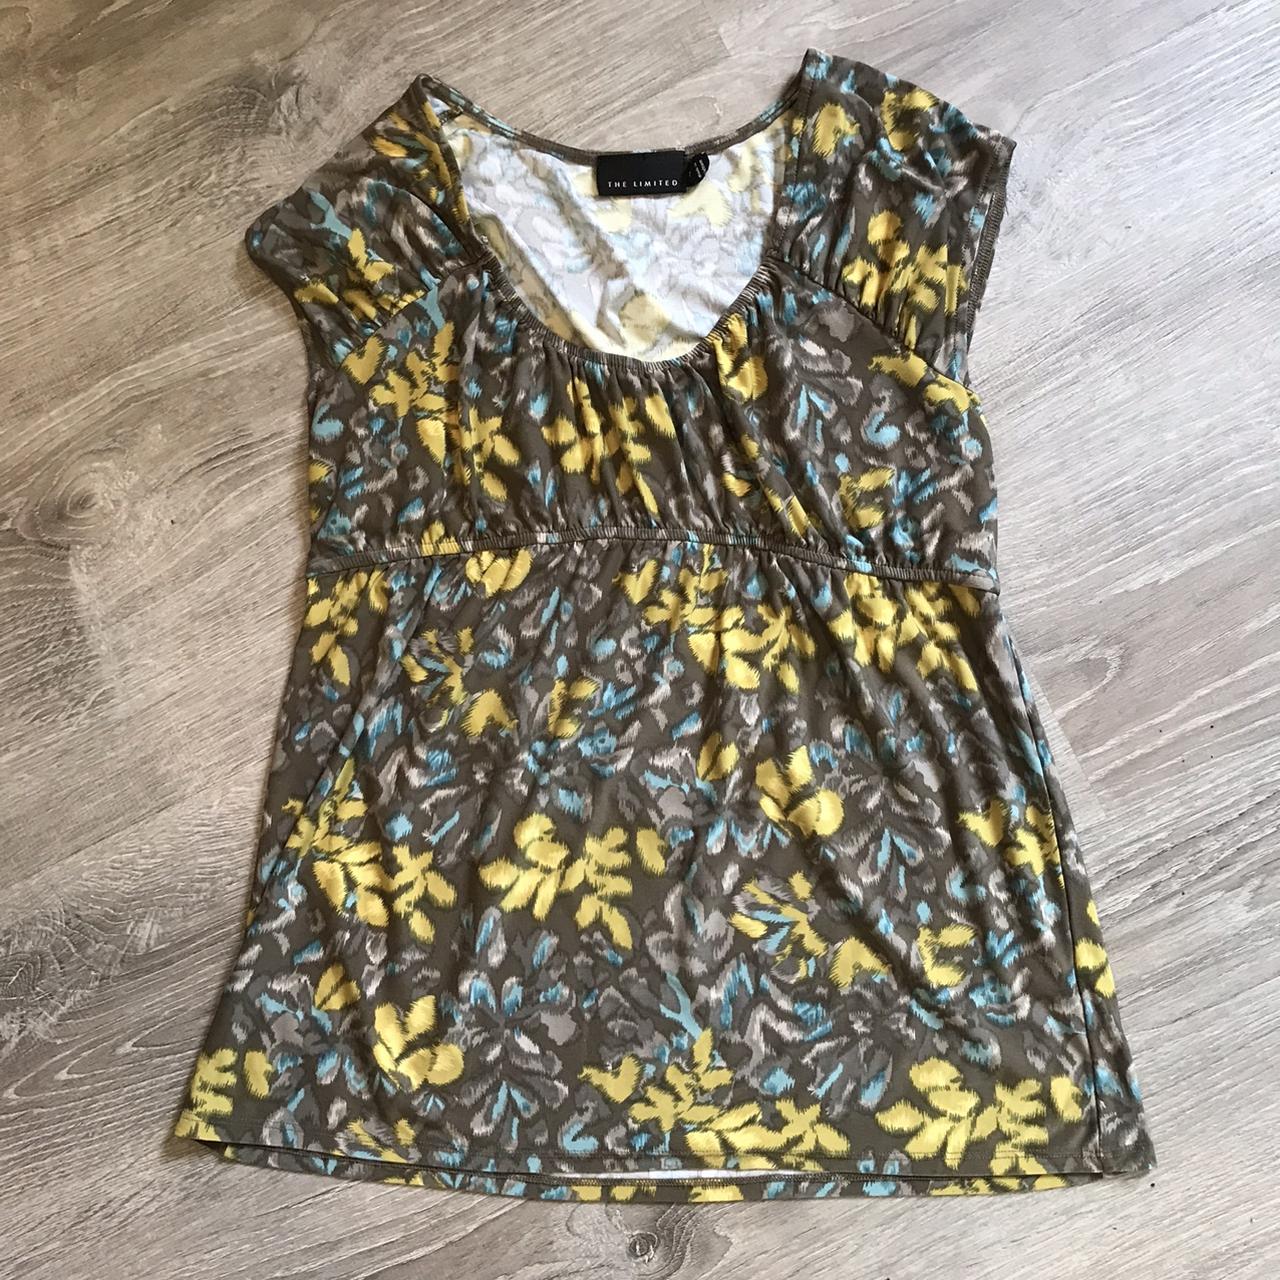 THE LIMITED Women's Yellow and Silver Crop-top (2)